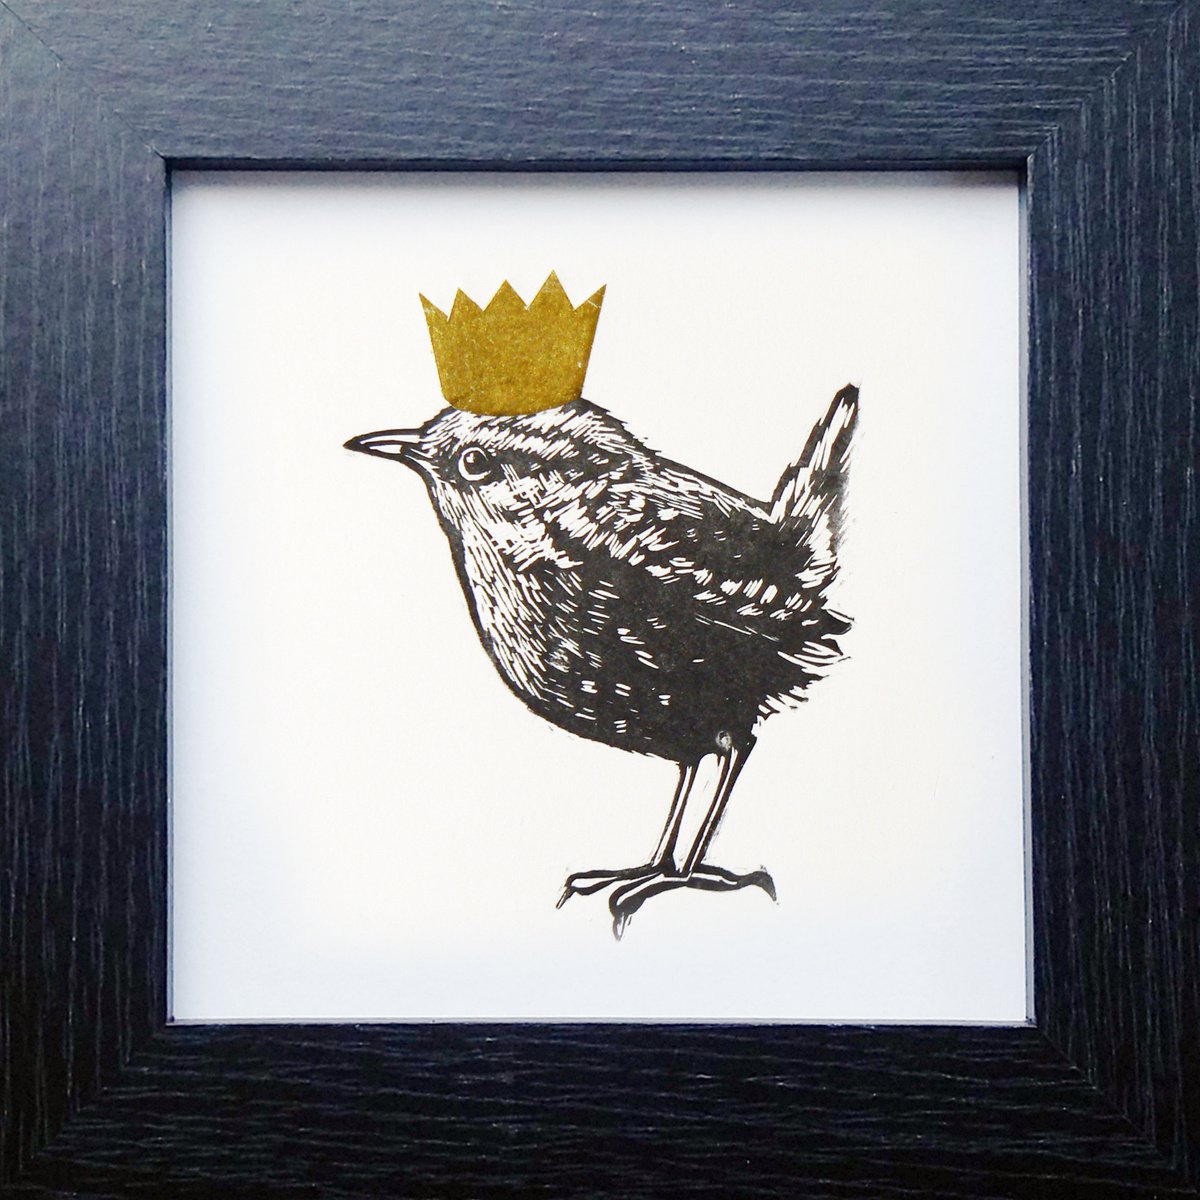 King - wren linoprint - framed and ready to hang by Carolynne Coulson